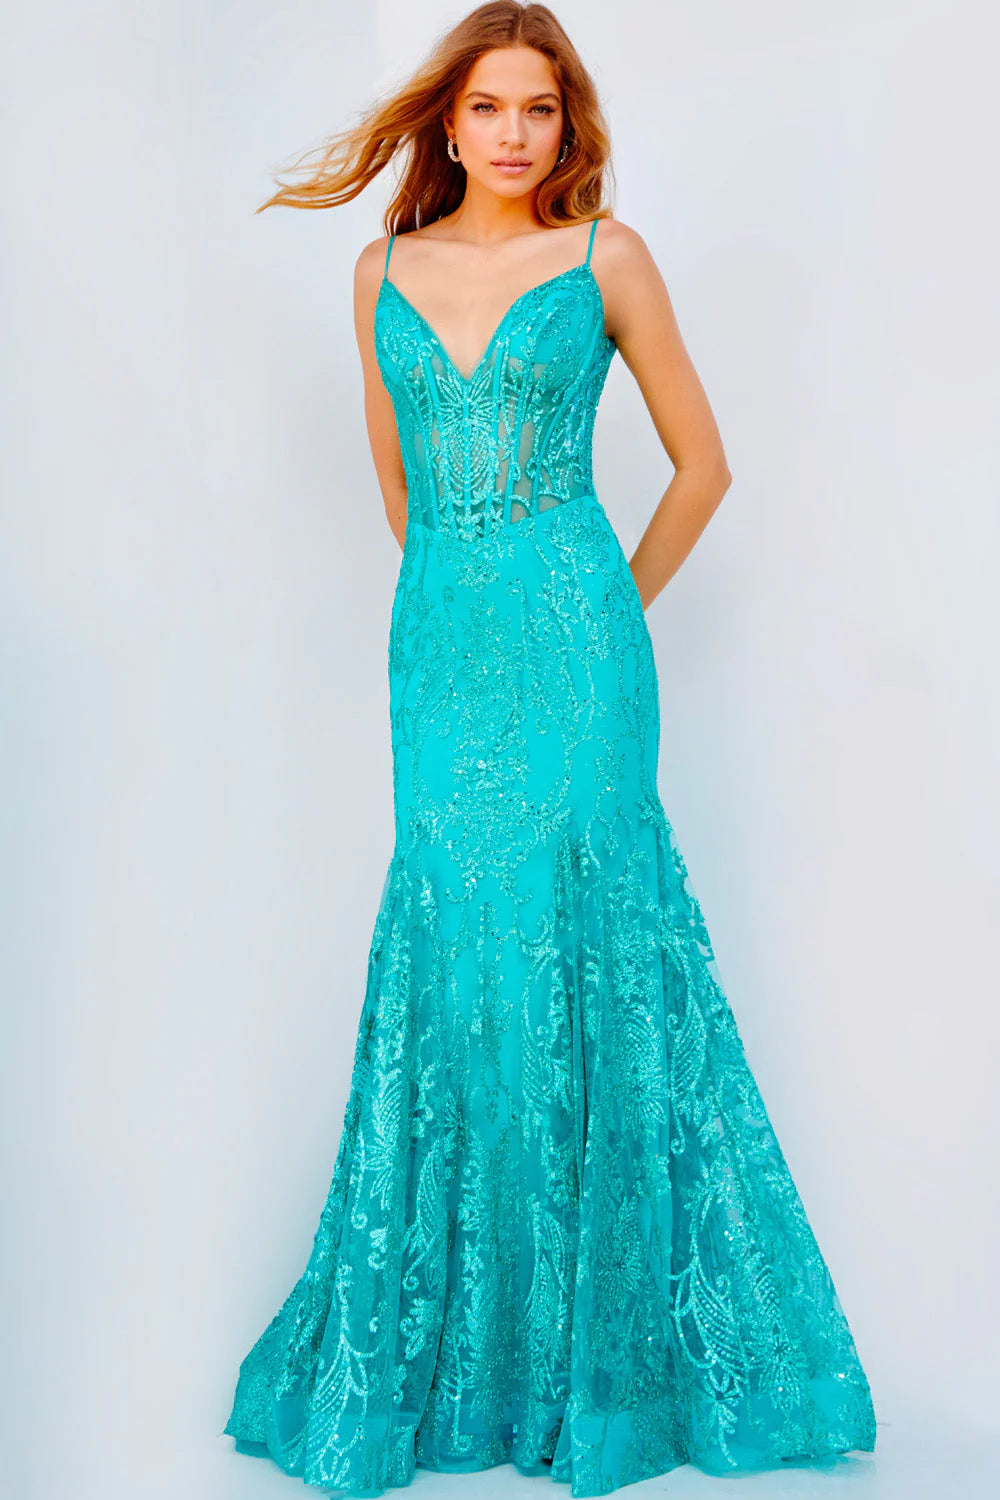 The Jovani 22388 Long Fitted Sheer Corset Mermaid Glitter Prom Dress is constructed with a fitted corset bodice, adorned with glittery accents and a mermaid silhouette. It is designed with a V-neckline, sheer fabric overlay and a long, ruched skirt. Perfect for special occasions, this formal gown will have you looking and feeling your best.  Size: 14  Color: Aqua